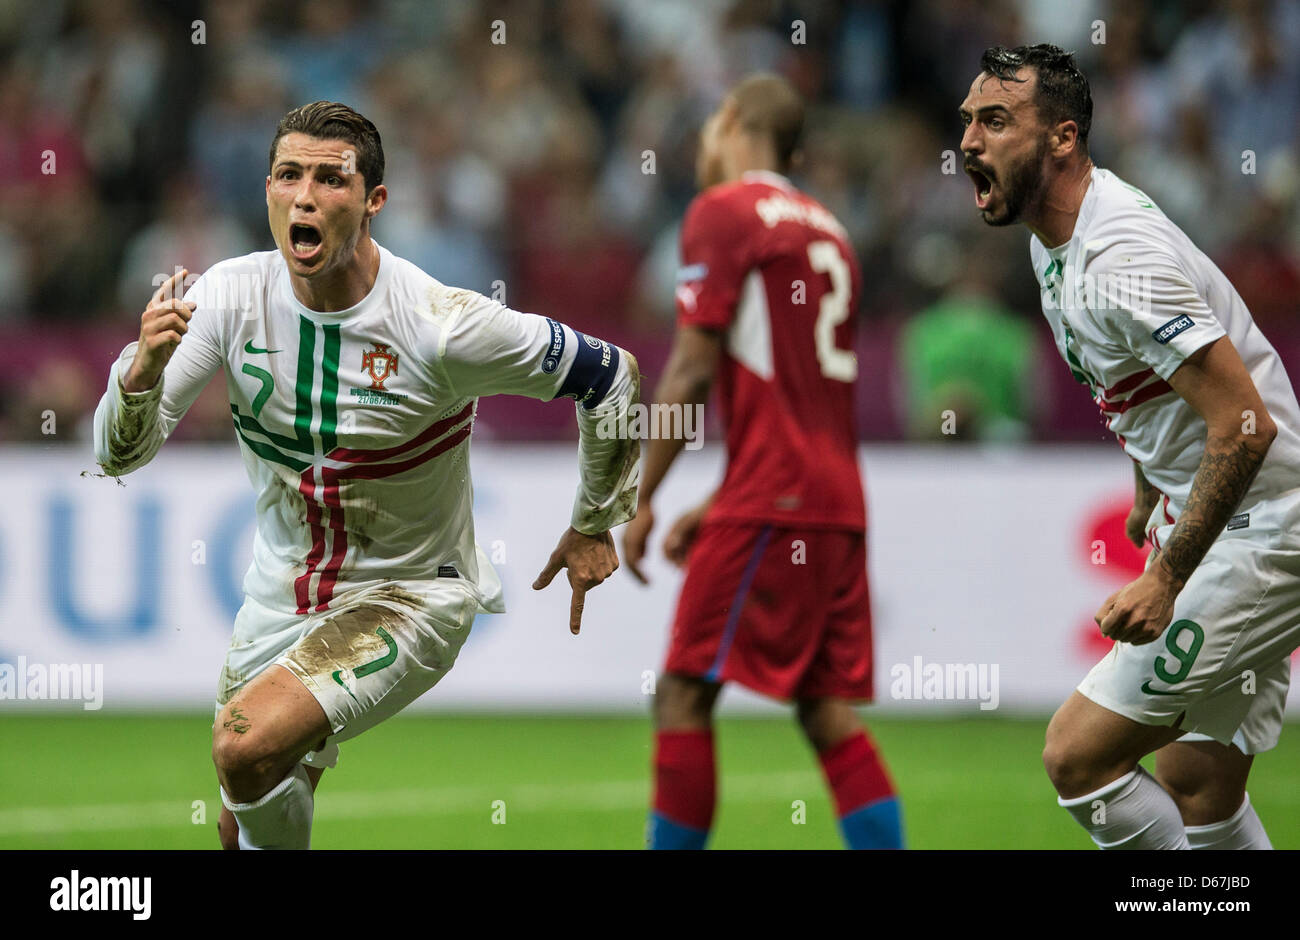 Portugal's Cristiano Ronaldo celebrates scoring the 1-0 with team mate Hugo Almeida during the UEFA EURO 2012 quarter-final soccer match Czech Republic vs Portugal at the National Stadium in Warsaw, Poland, 21 June 2012. Photo: Jens Wolf dpa (Please refer to chapters 7 and 8 of http://dpaq.de/Ziovh for UEFA Euro 2012 Terms & Conditions)  +++(c) dpa - Bildfunk+++ Stock Photo